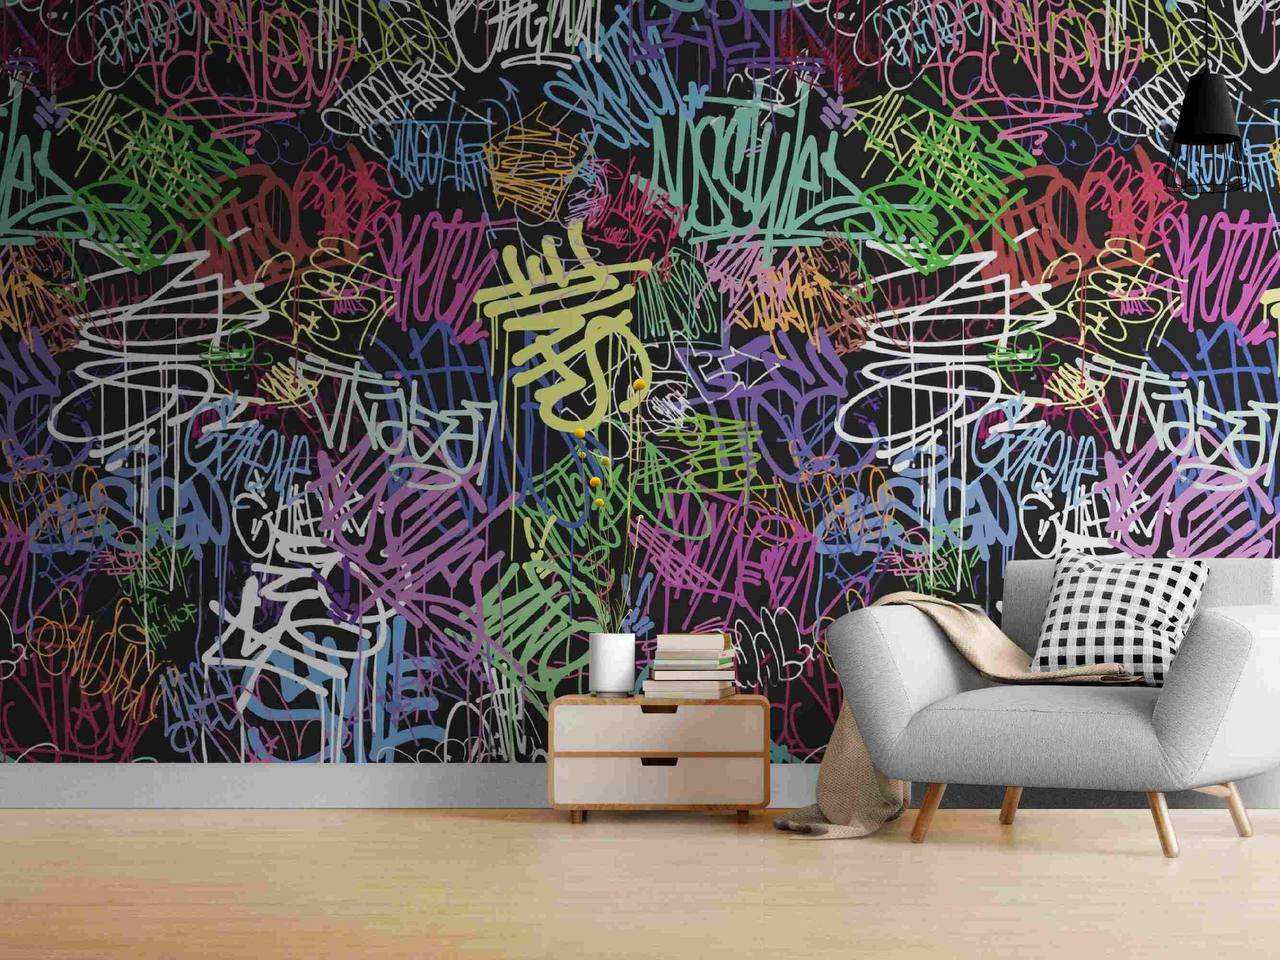 Peel and stick graffiti wallpaper in a living room